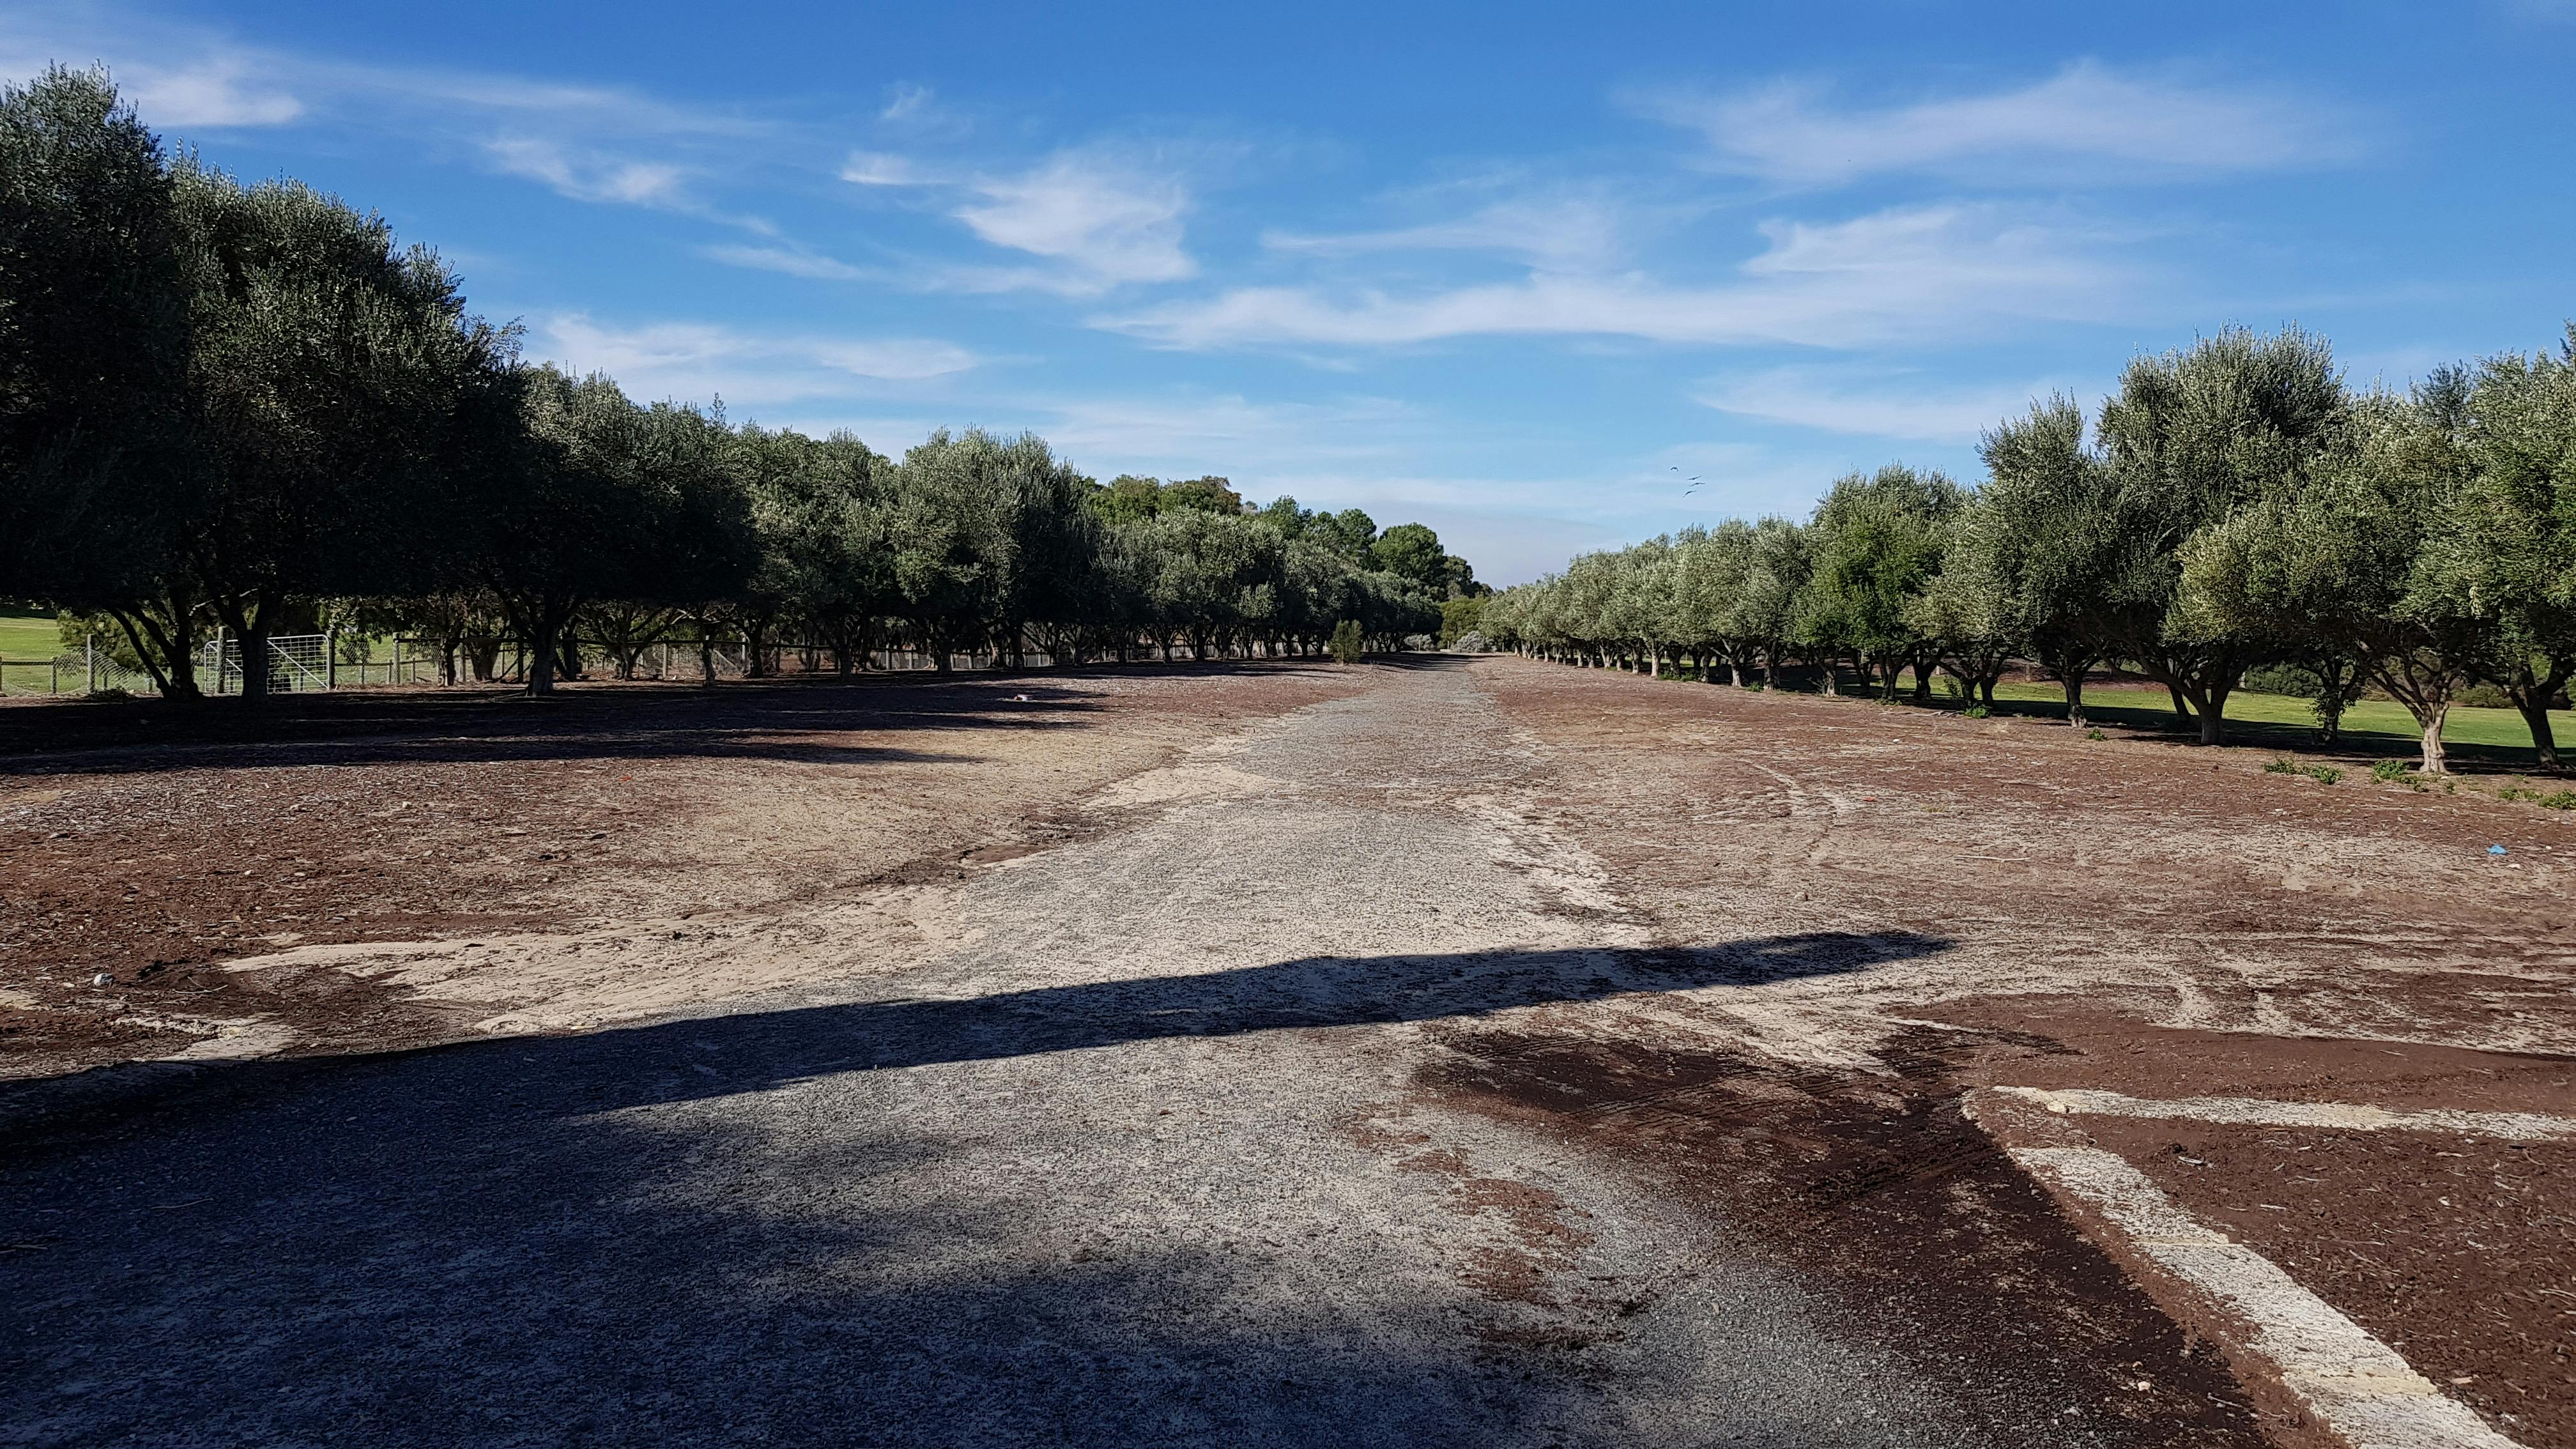 View to olive grove